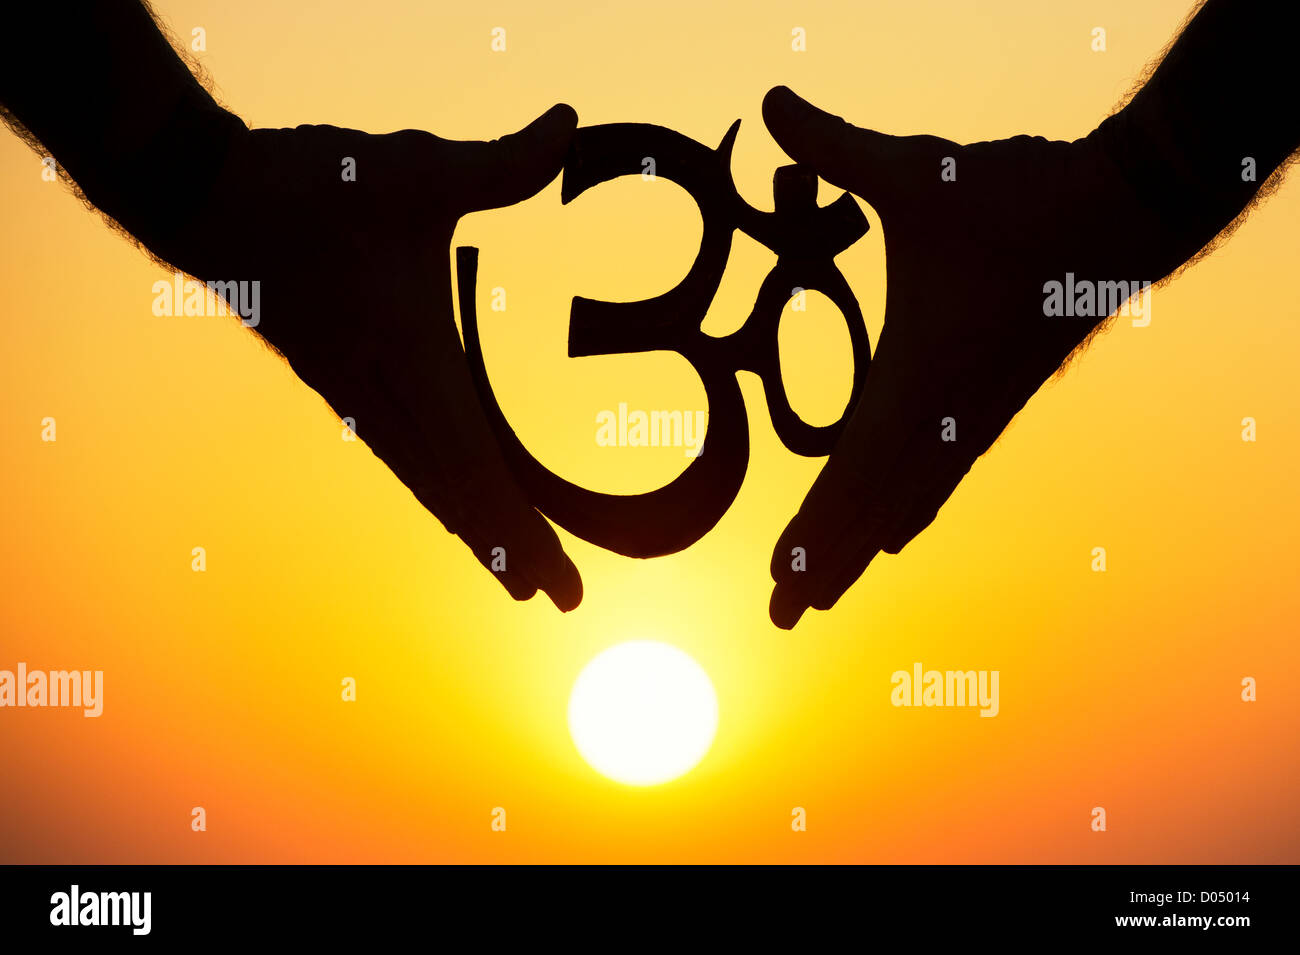 Hands holding Hindu OM / AUM symbol at sunset. India. Silhouette Stock Photo